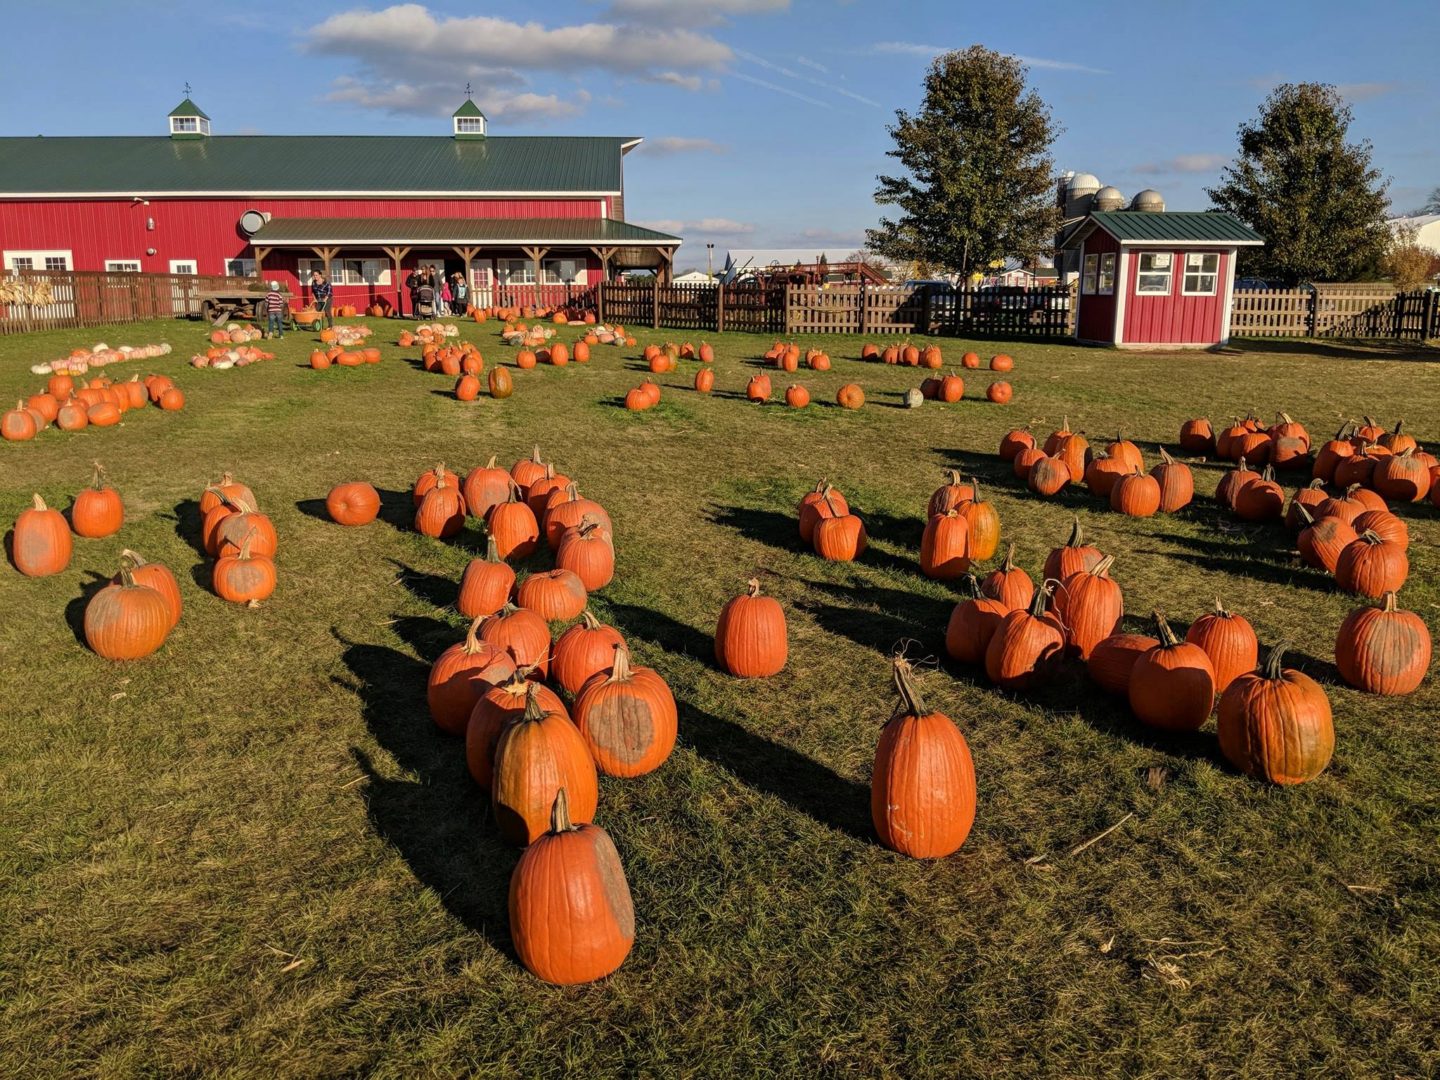 Road Trip! Best Pumpkin Patches in Illinois 🎃 CHICAGO FOOD AUTHORITY